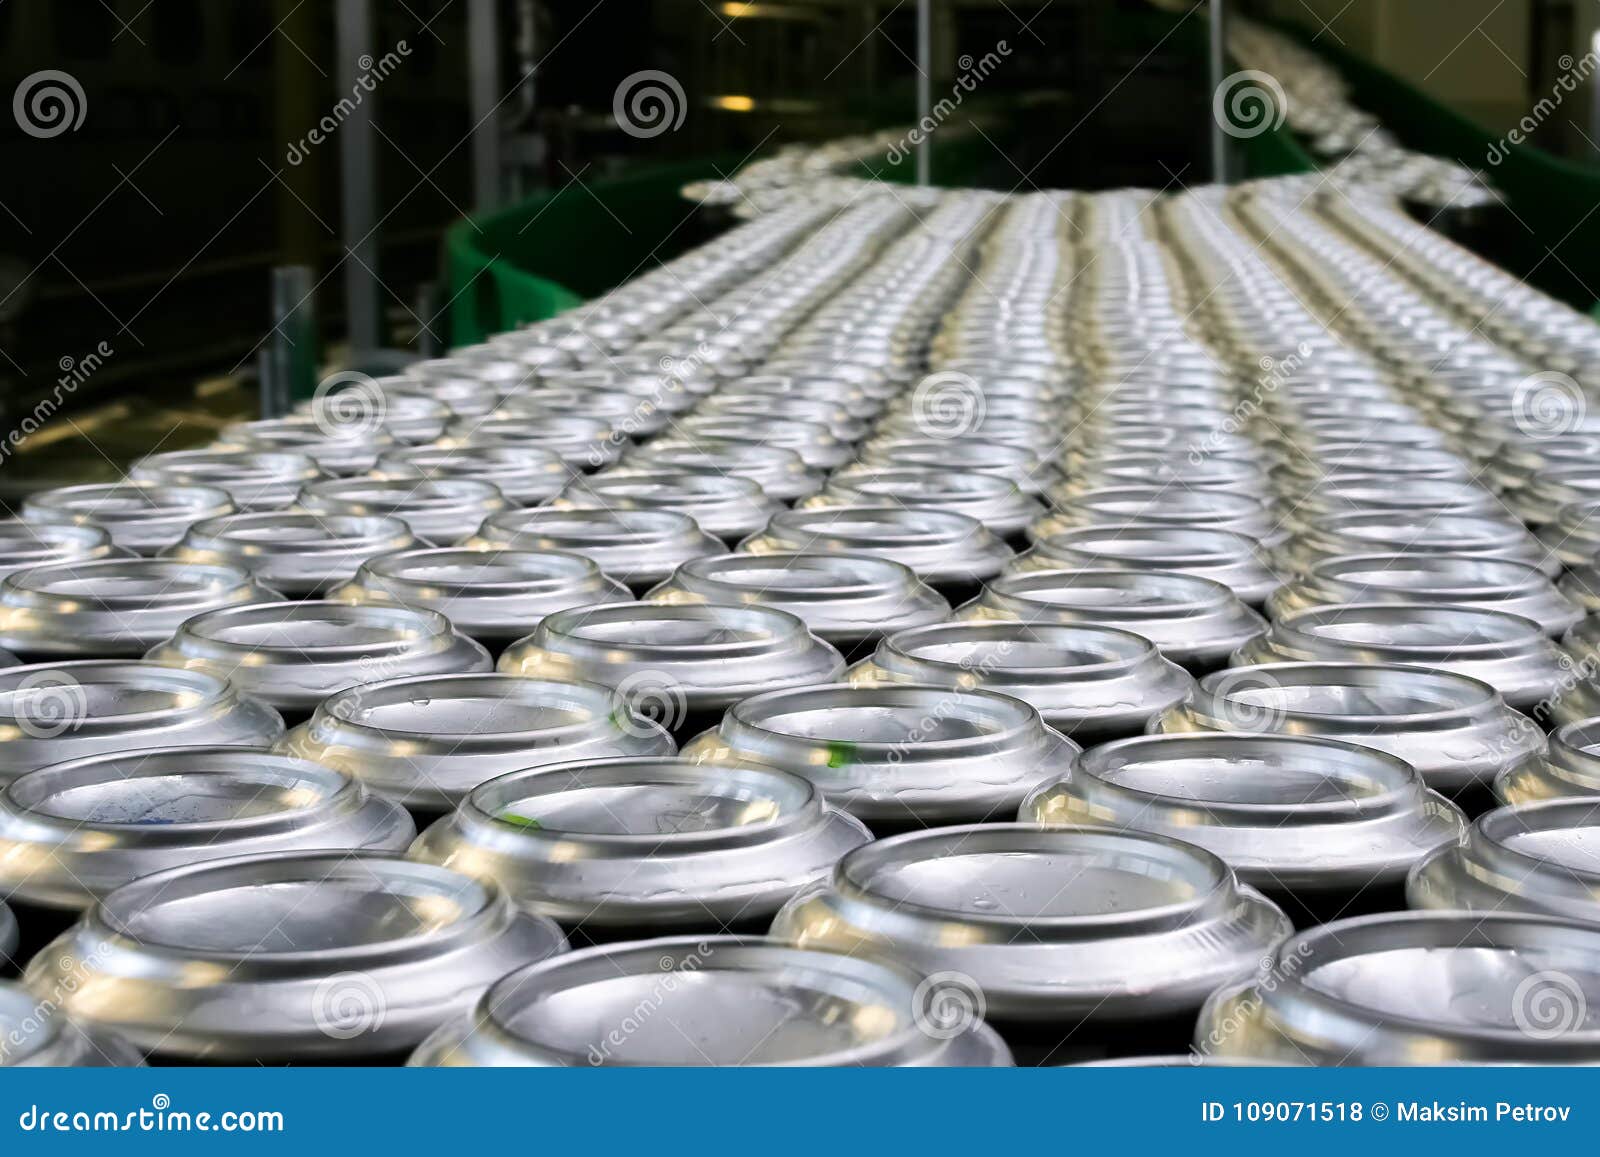 thousands of beverage aluminum cans on conveyor line at factory